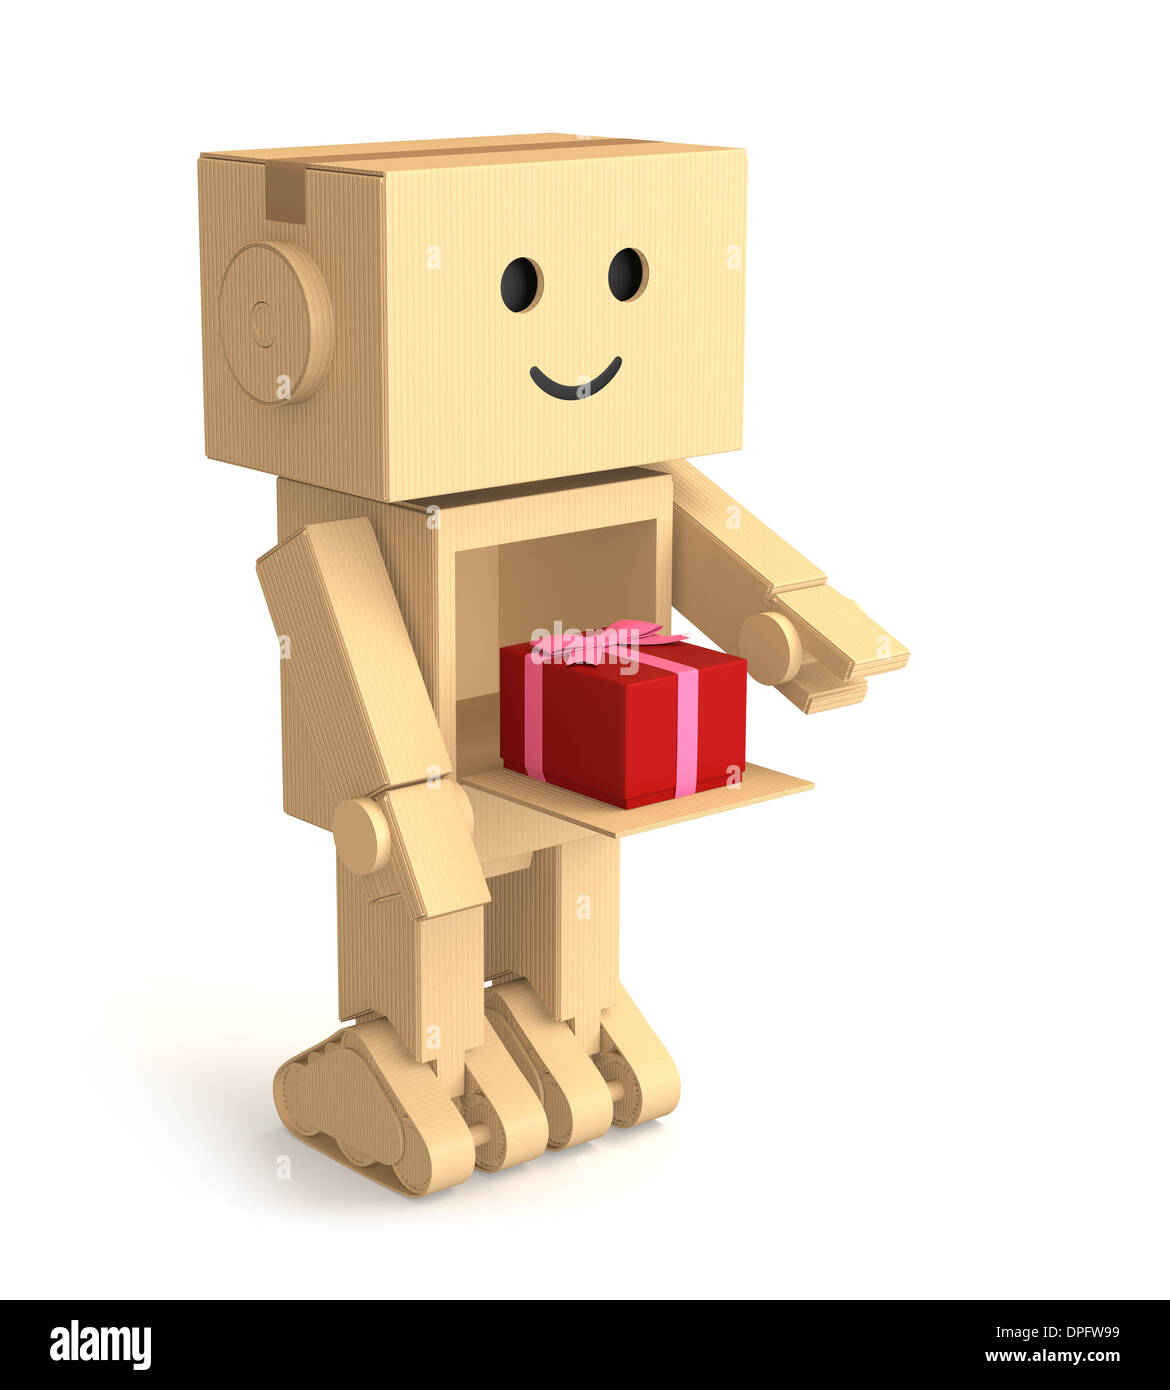 Cute cardboard robot deliver gift box Stock Photo - Alamy